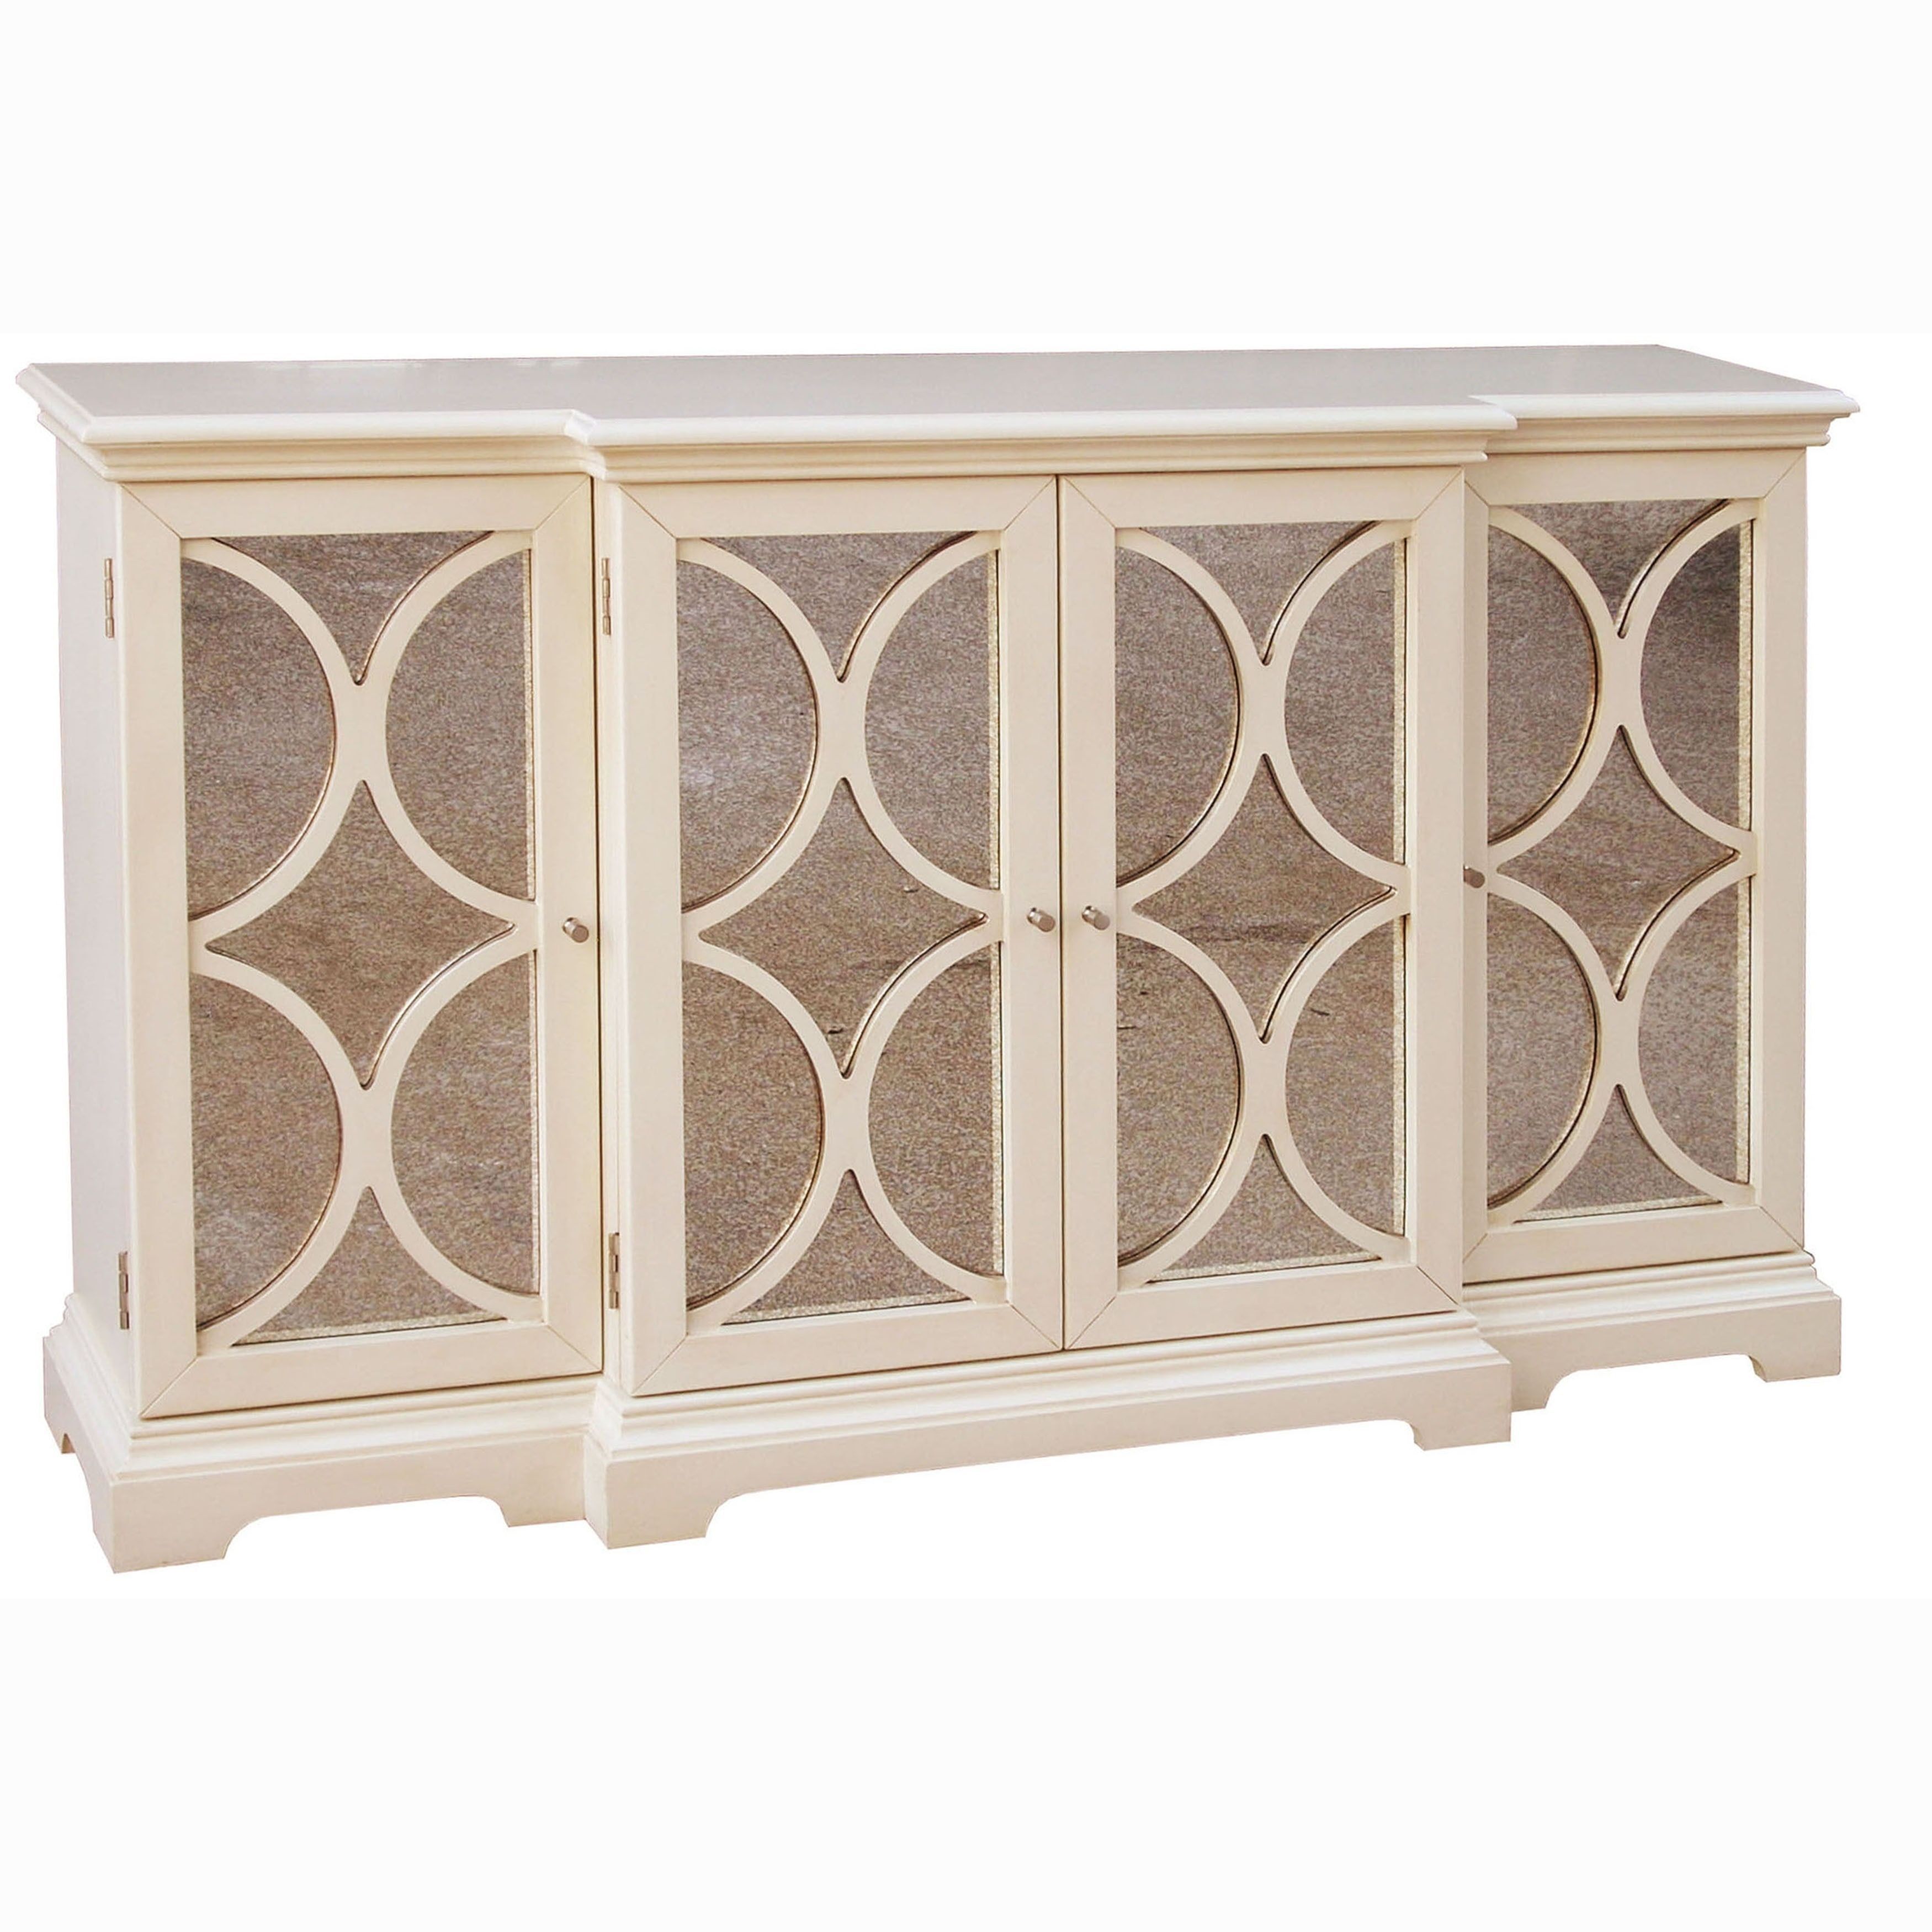 Cream Finish Antiqued Mirror Accent Chest/ Credenza, Multi For Drummond 3 Drawer Sideboards (View 17 of 30)